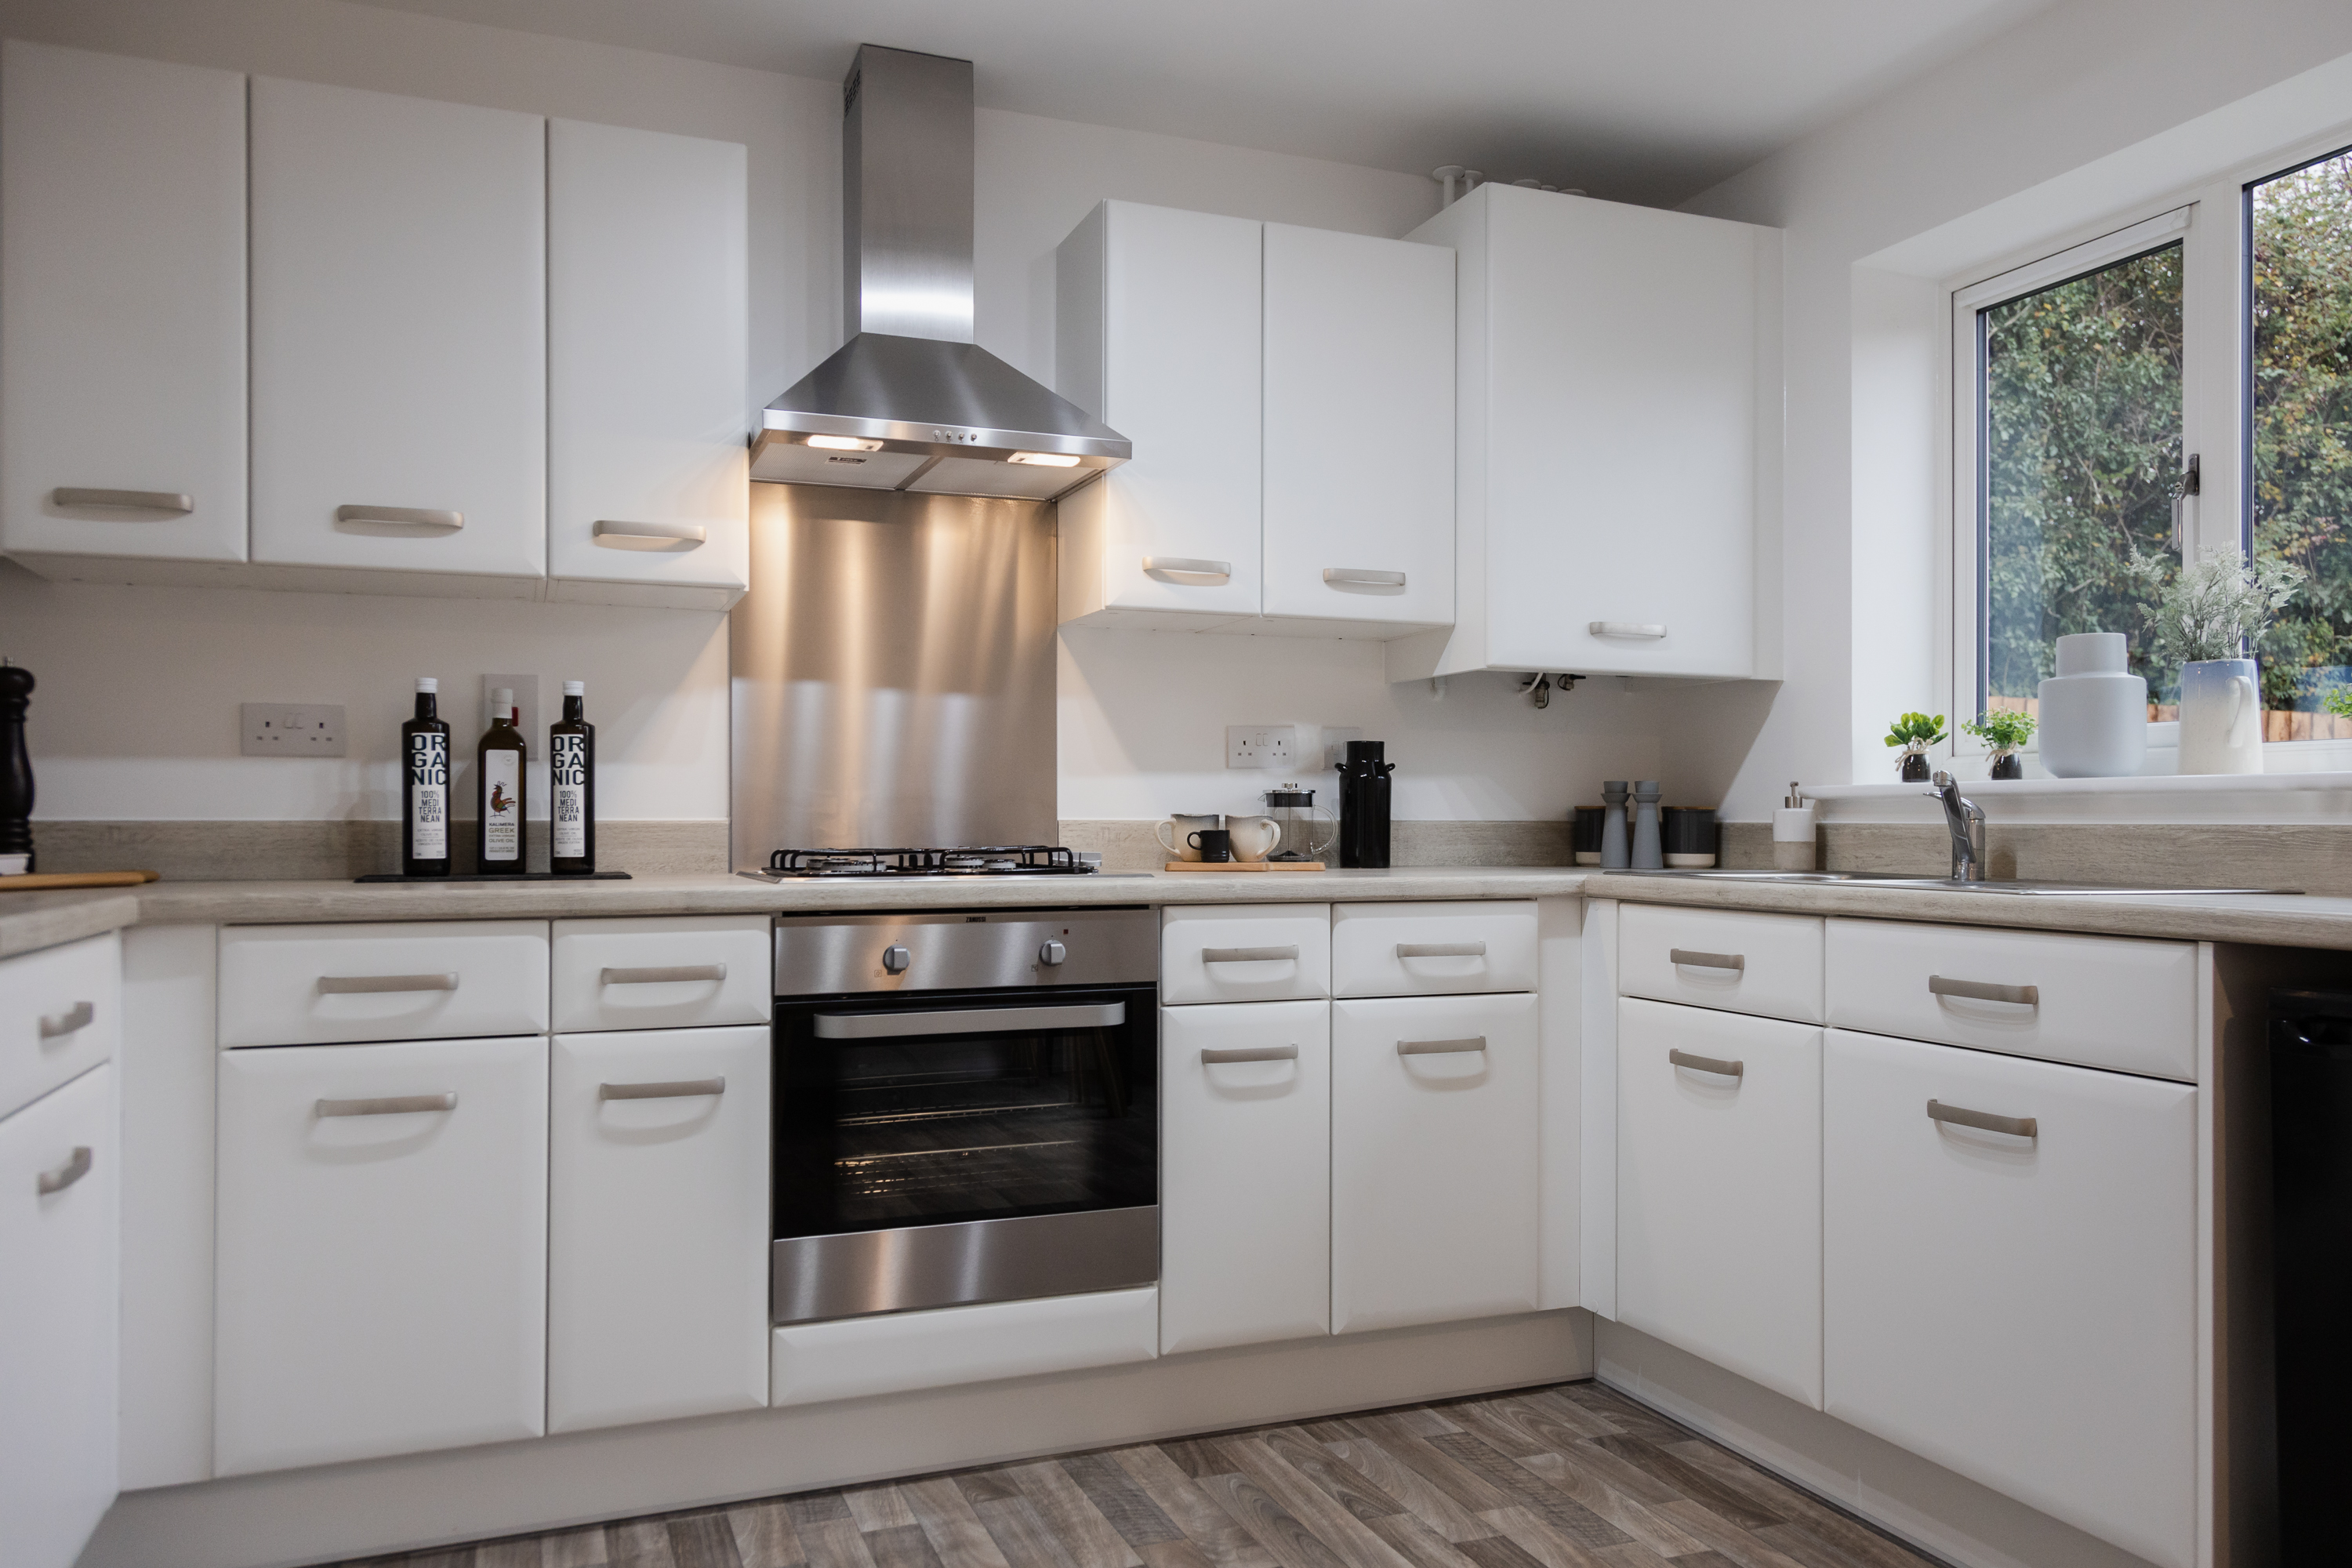 A modern kitchen with white door front, stone colour worktops and stainless steel accessories.